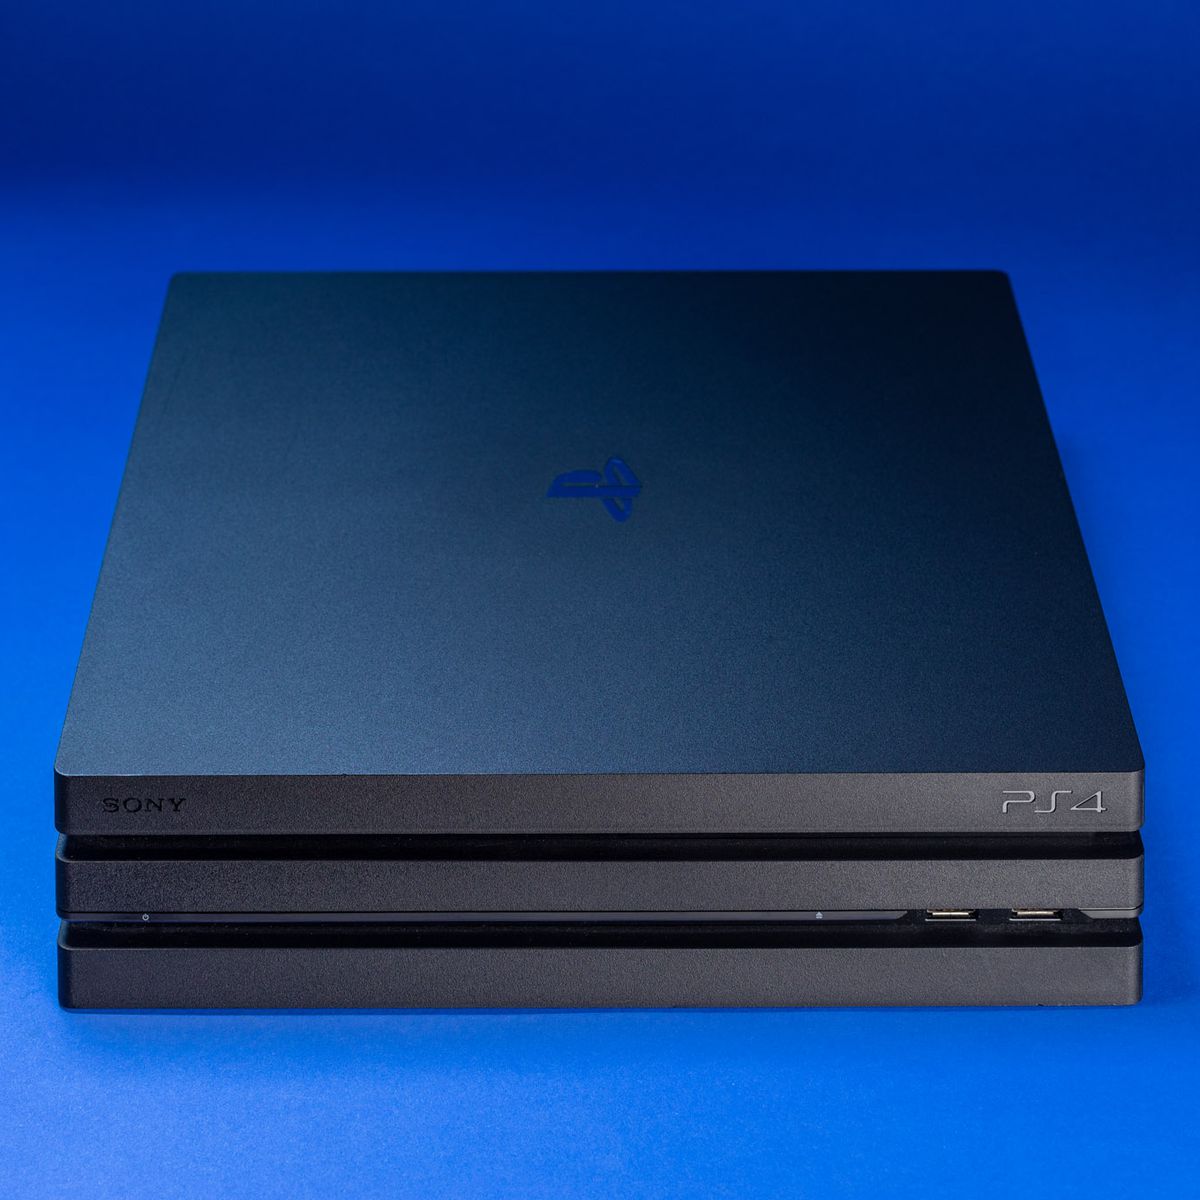 PS4 Pro, front view on blue background